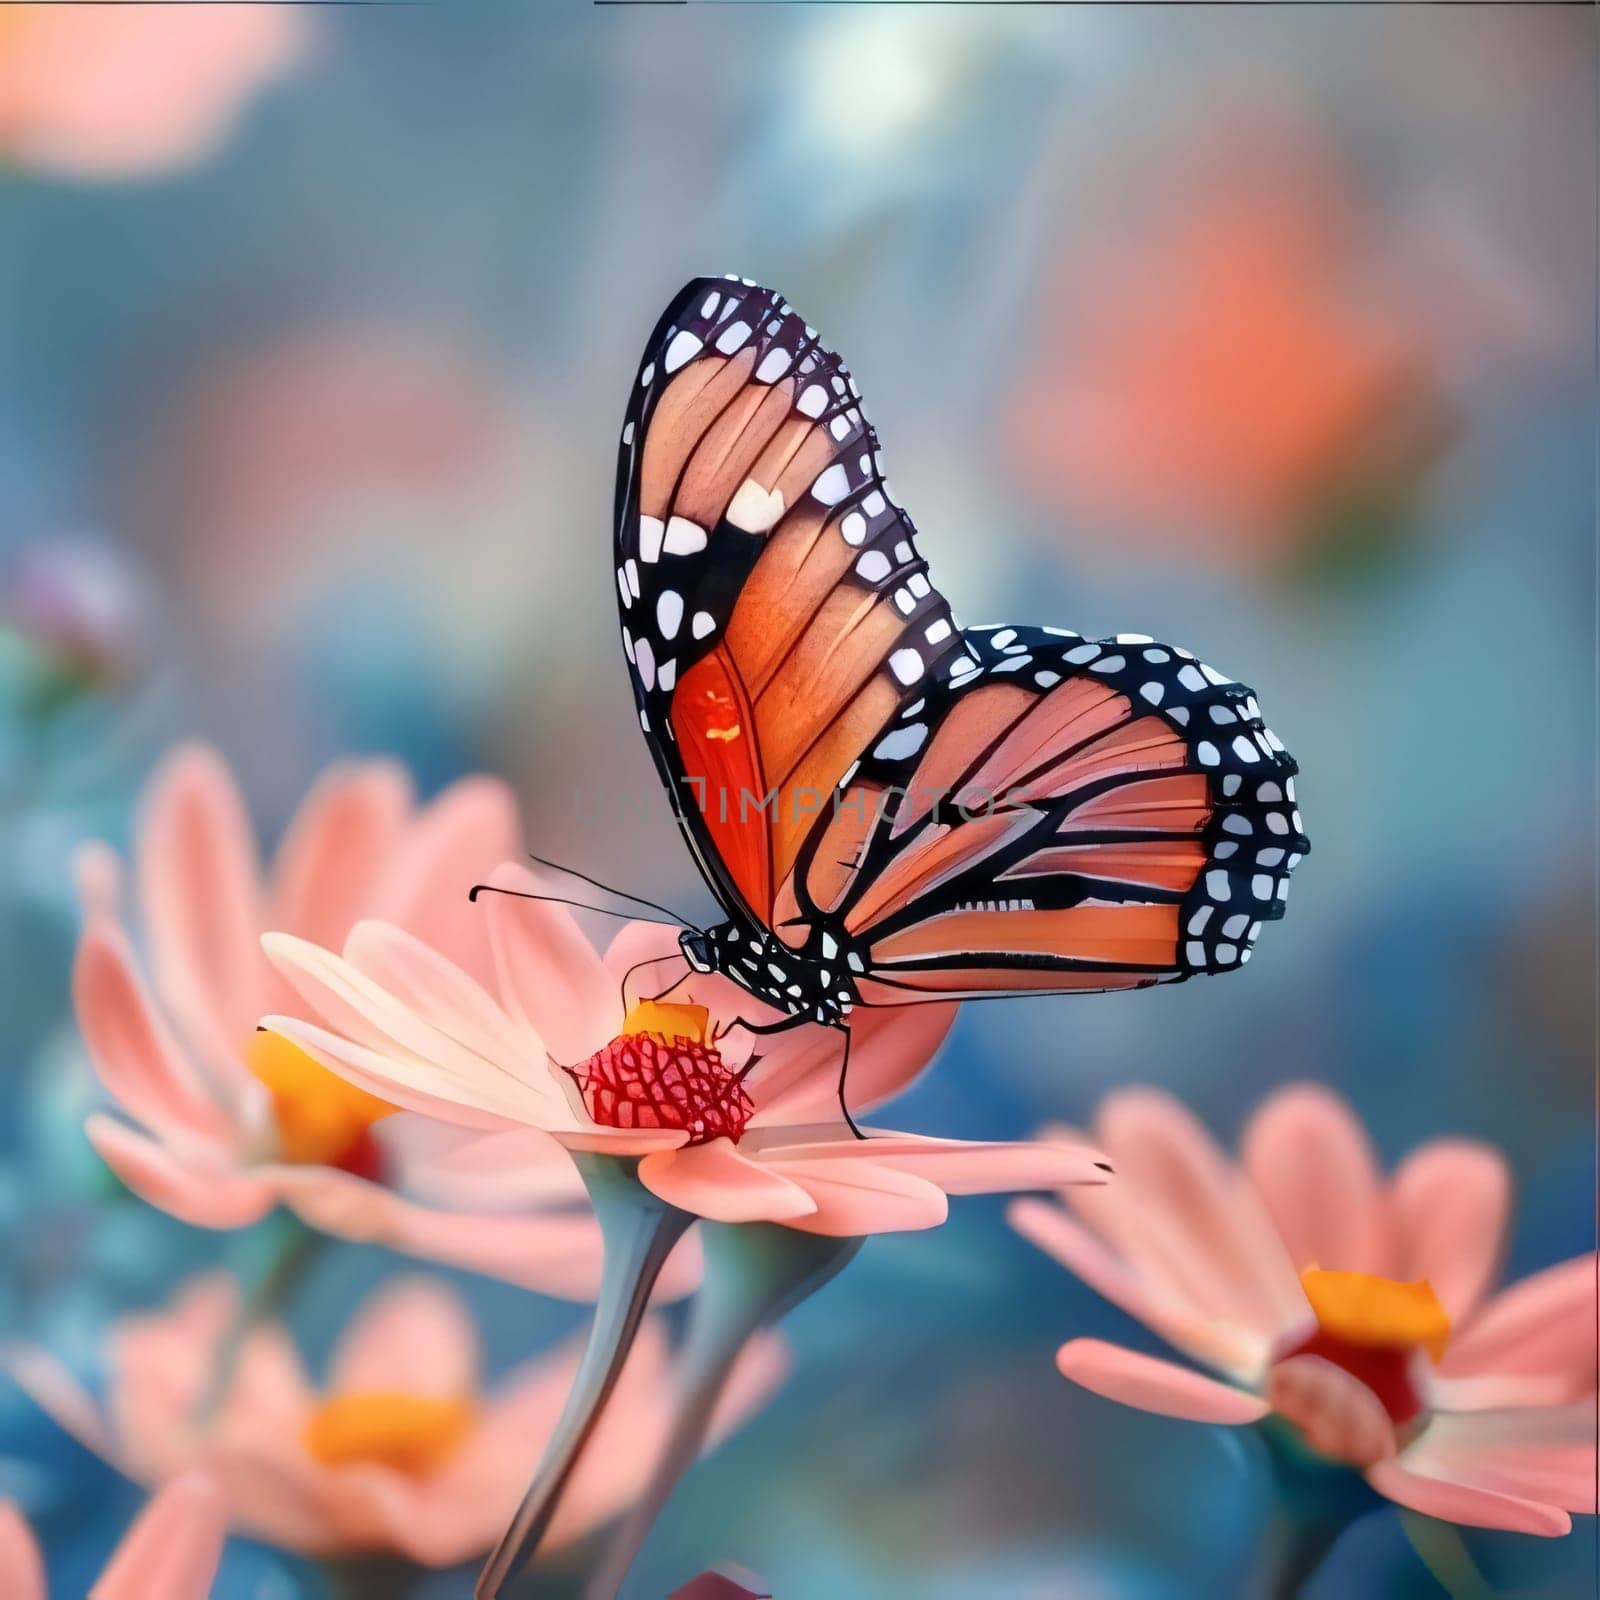 Orange black and white butterfly sitting on pink flower smudged background. Flowering flowers, a symbol of spring, new life. A joyful time of nature awakening to life.